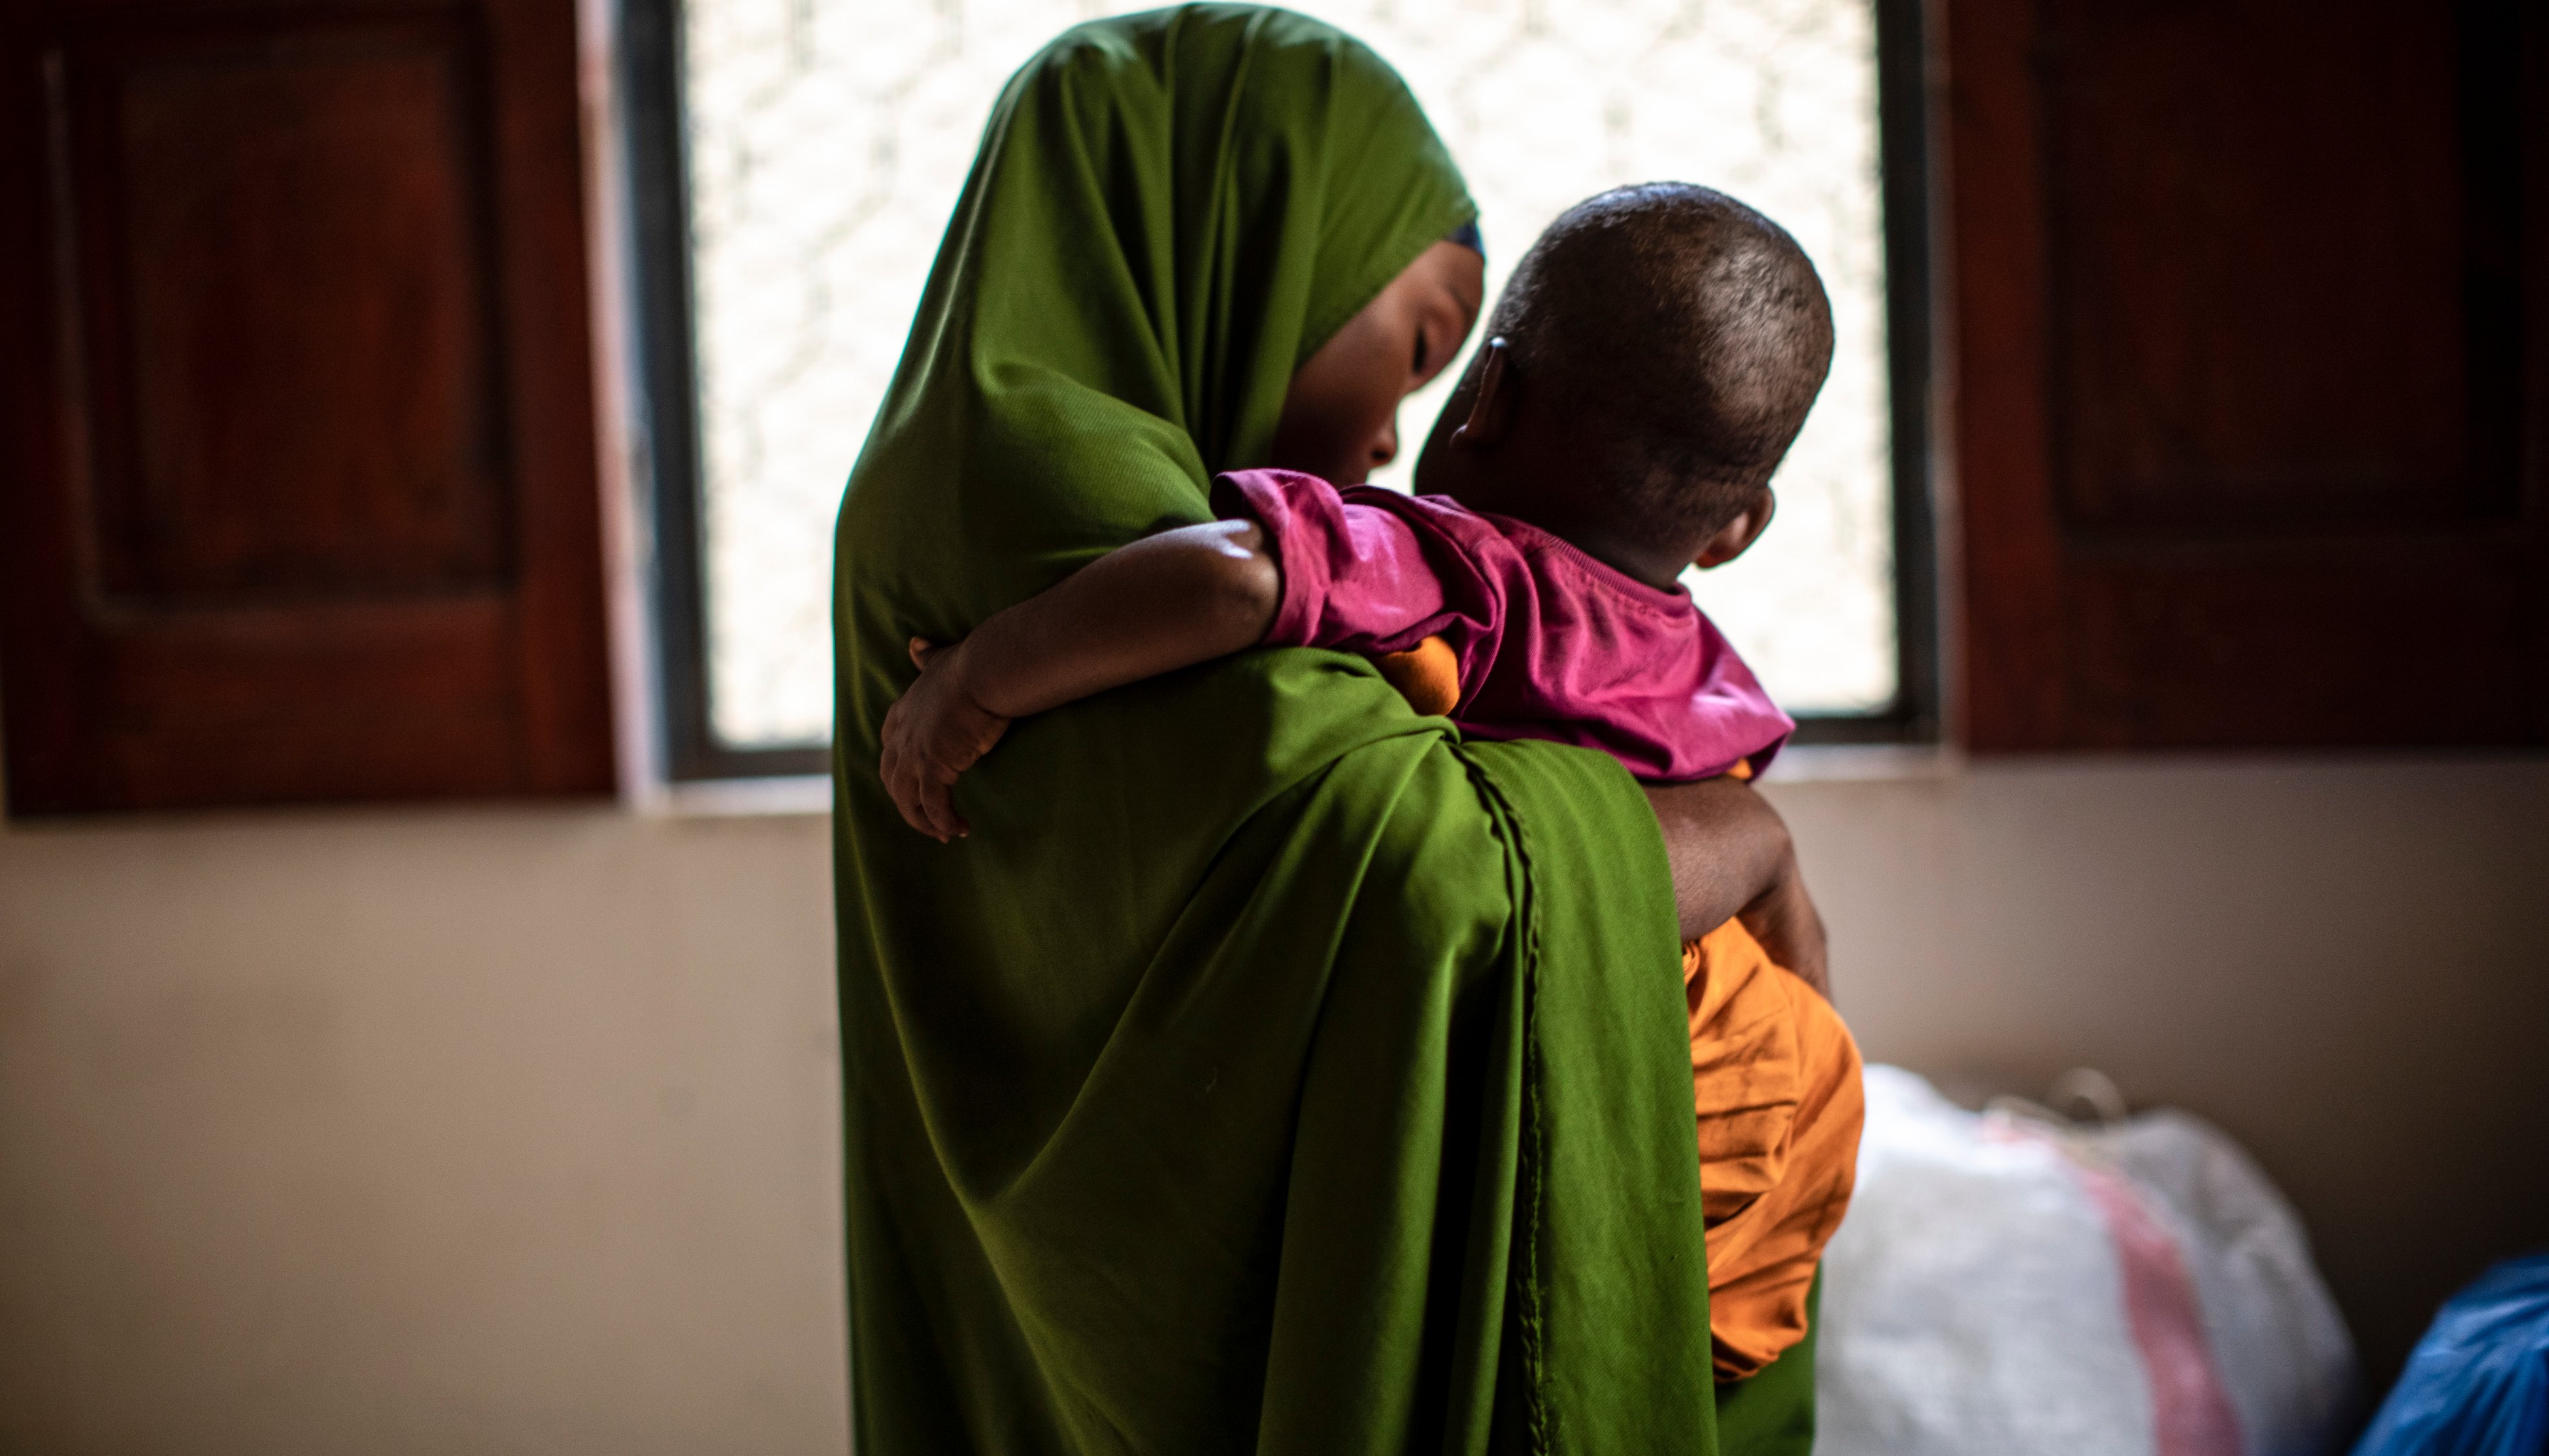 Read Climate Change and Drought Create Crisis in Somalia by Catholic Relief Services